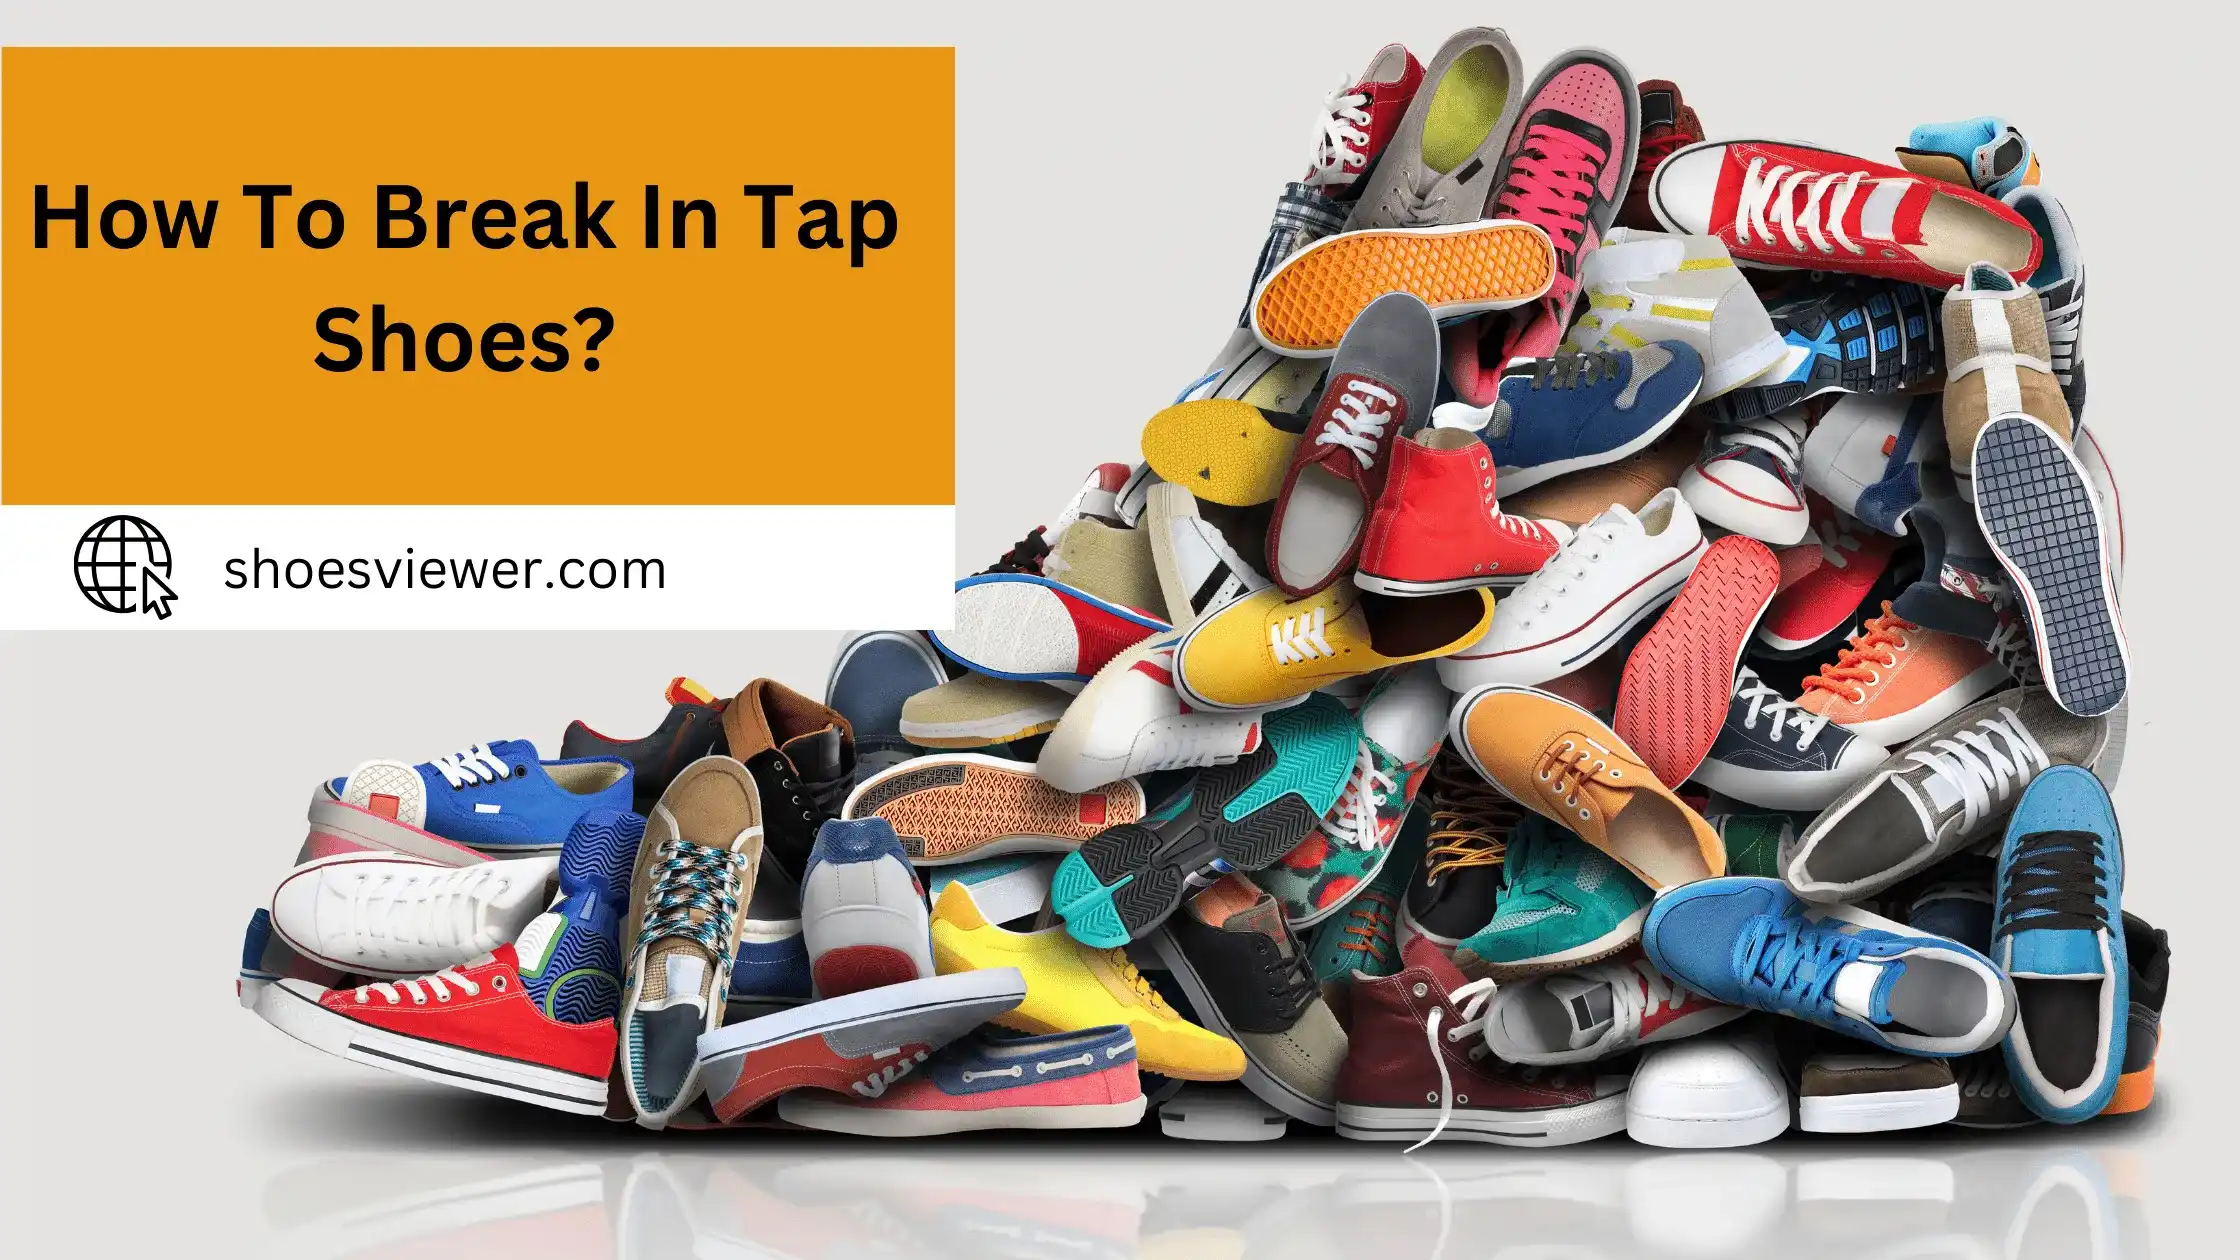 How To Break In Tap Shoes? Expert Tips And Advice